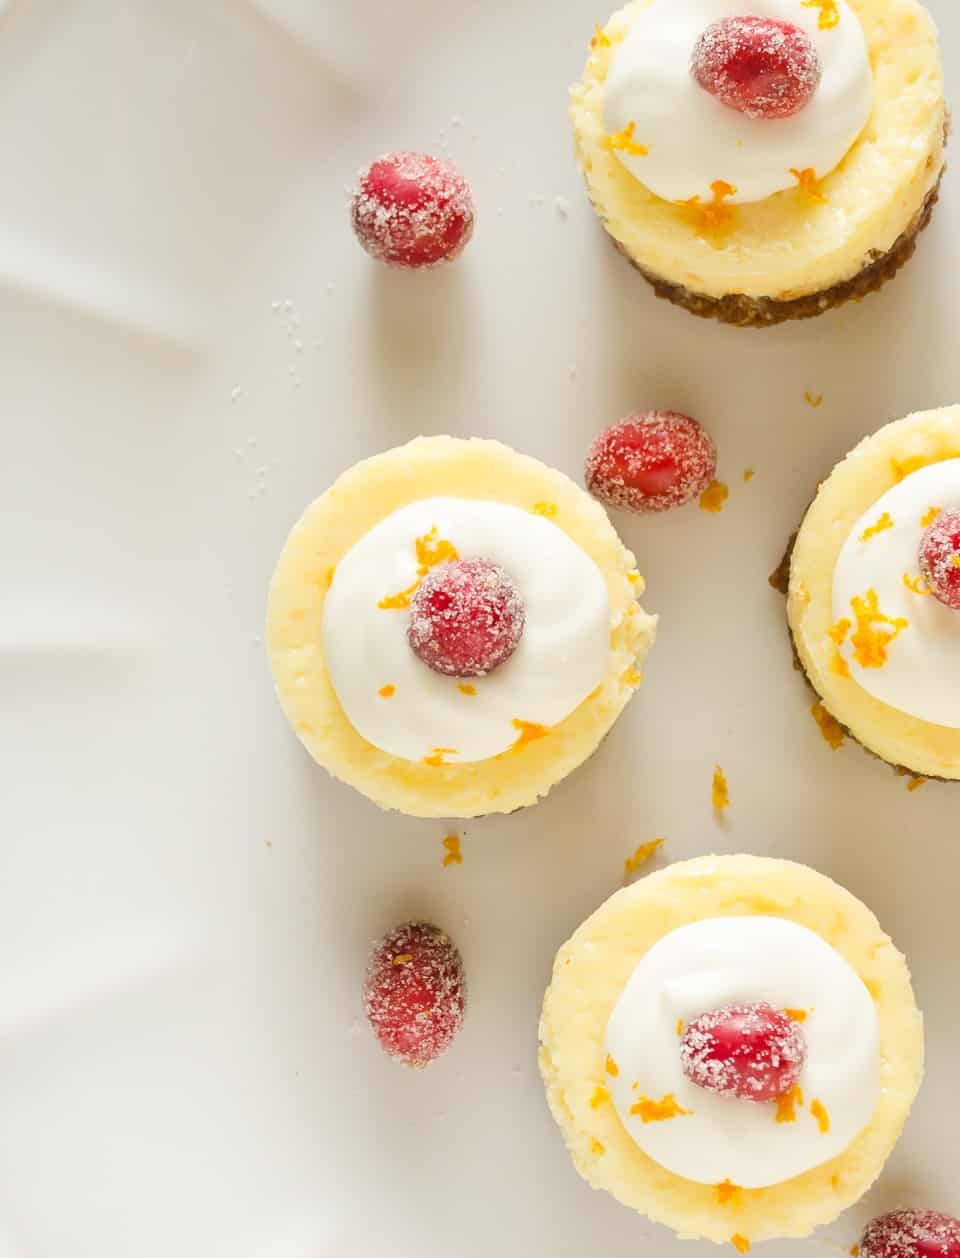 15 Recipes That Take New York Cheesecake to the Next Level: Mini Cranberry Orange Cheesecakes with Gingersnap Crust